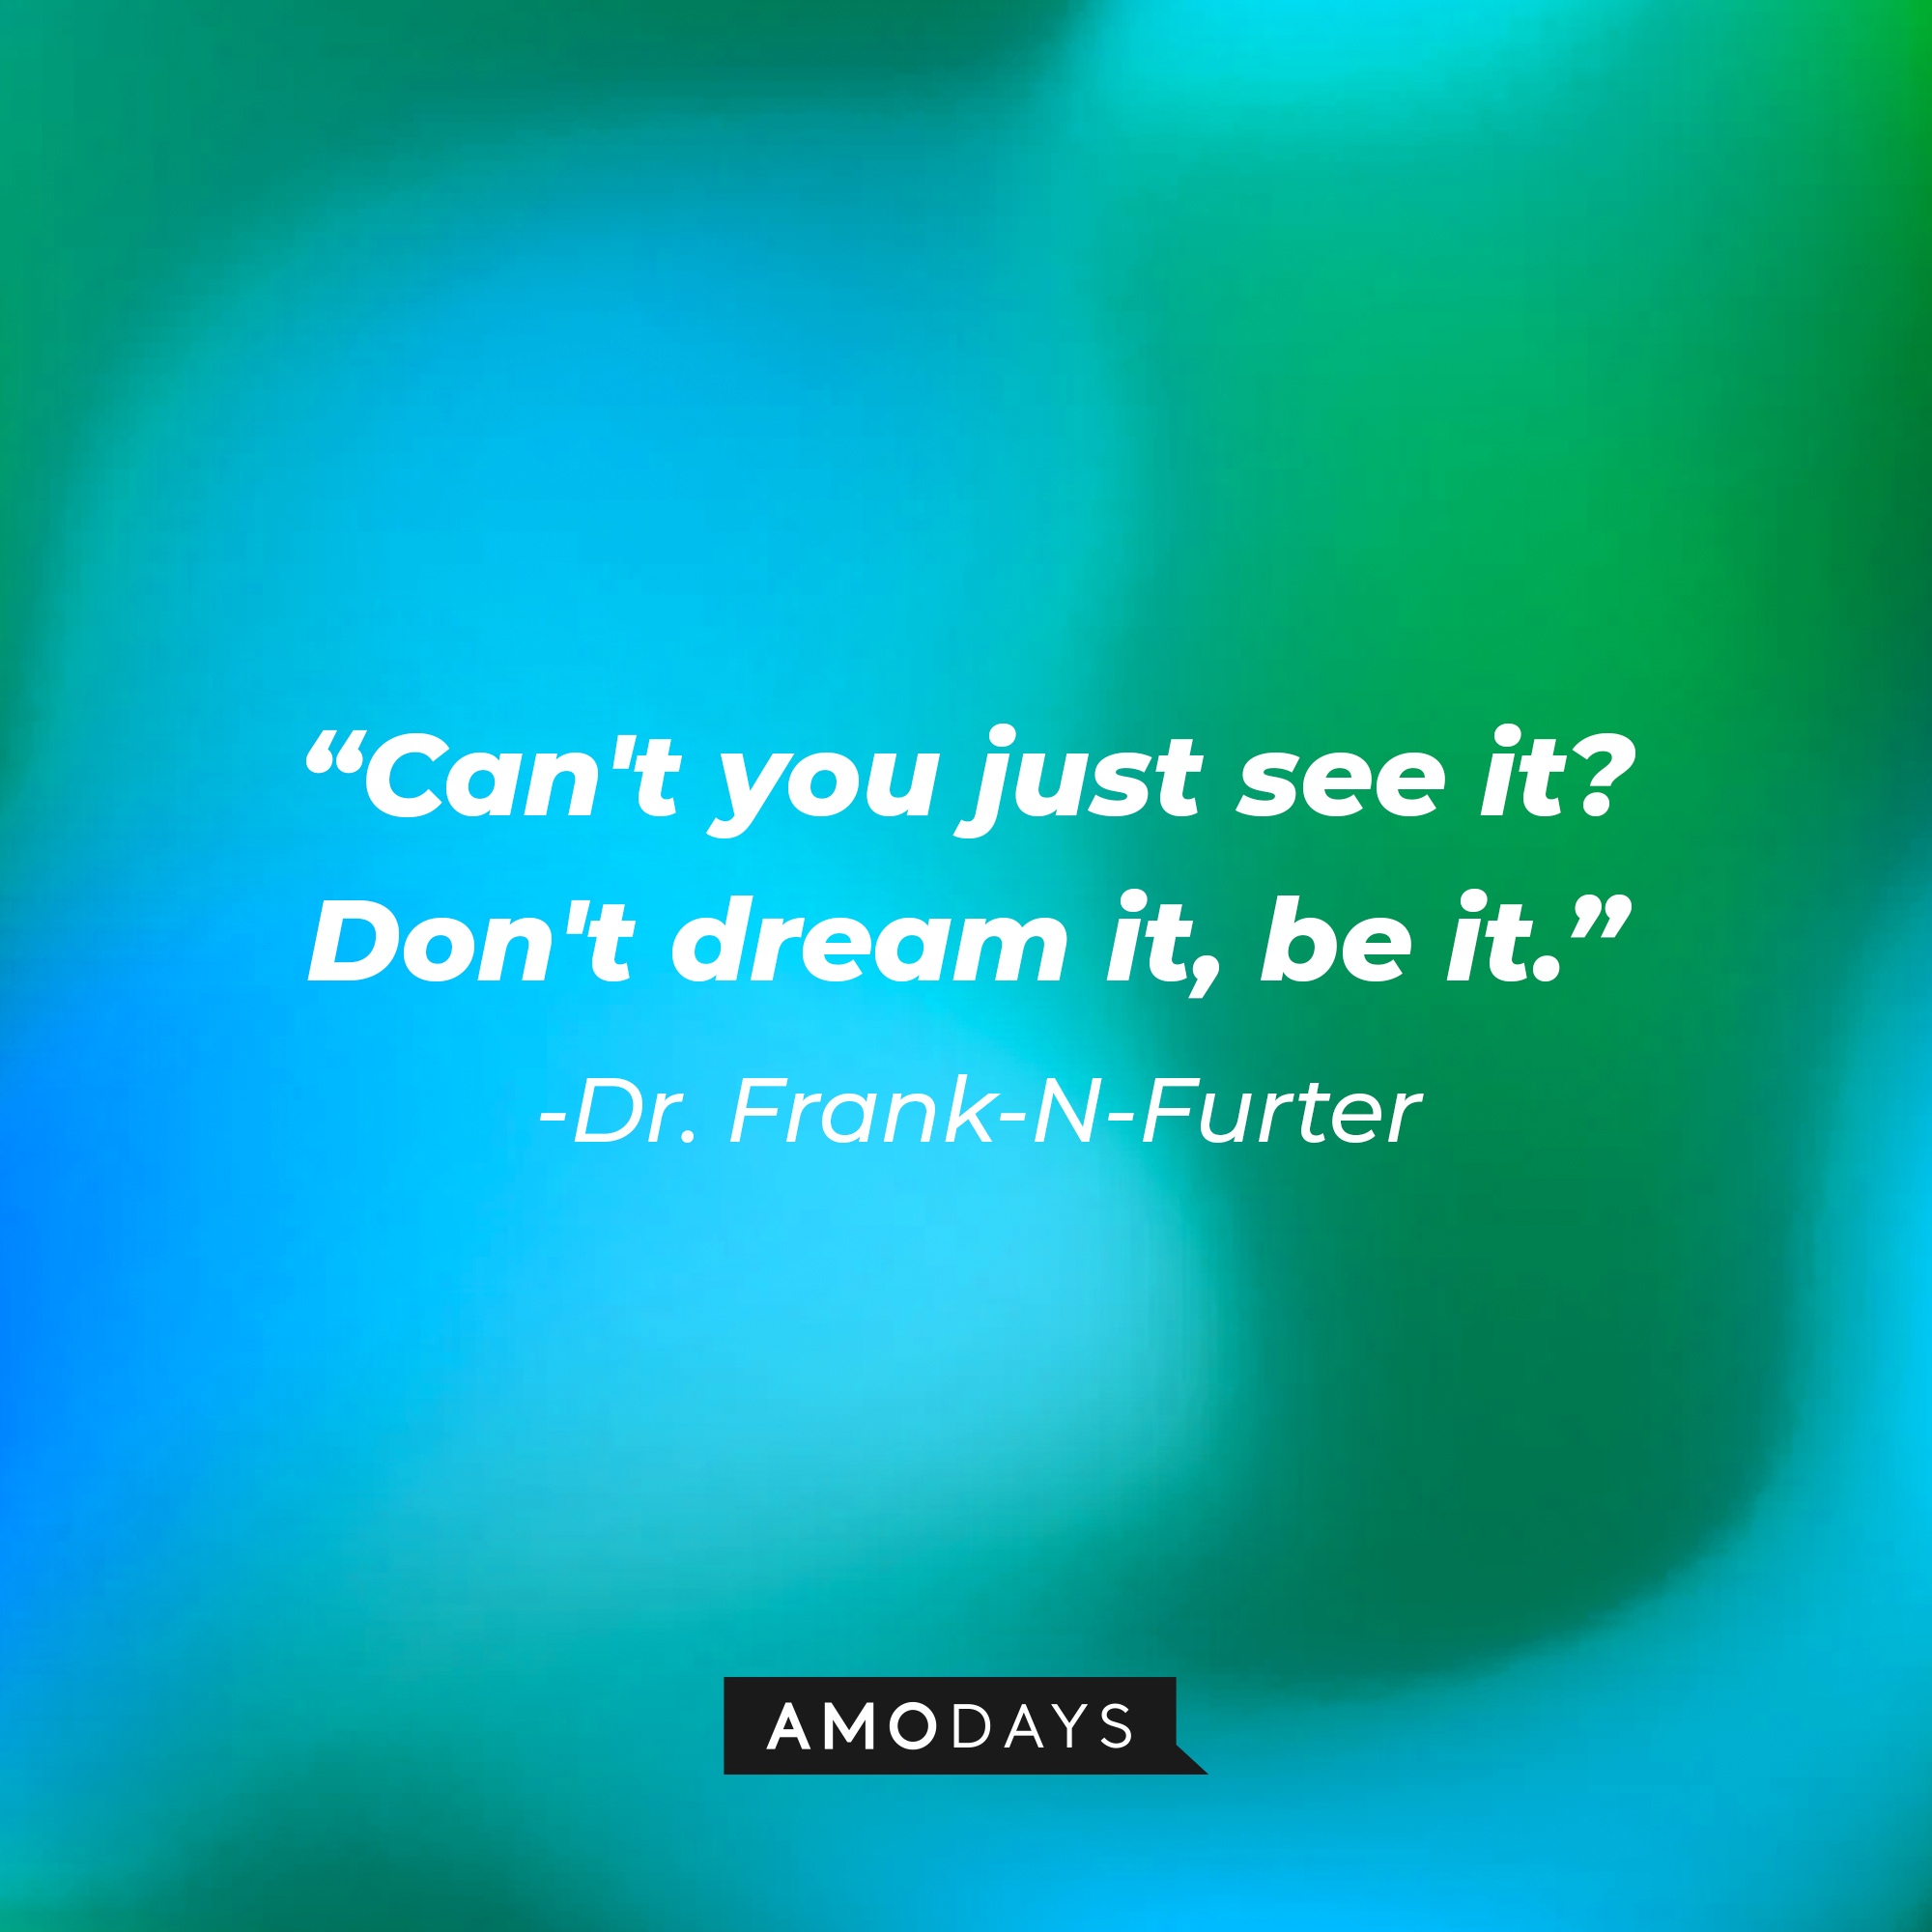 Dr. Frank-N-Furter's quote: "Can't you just see it? Don't dream it, be it." | Source: AmoDays